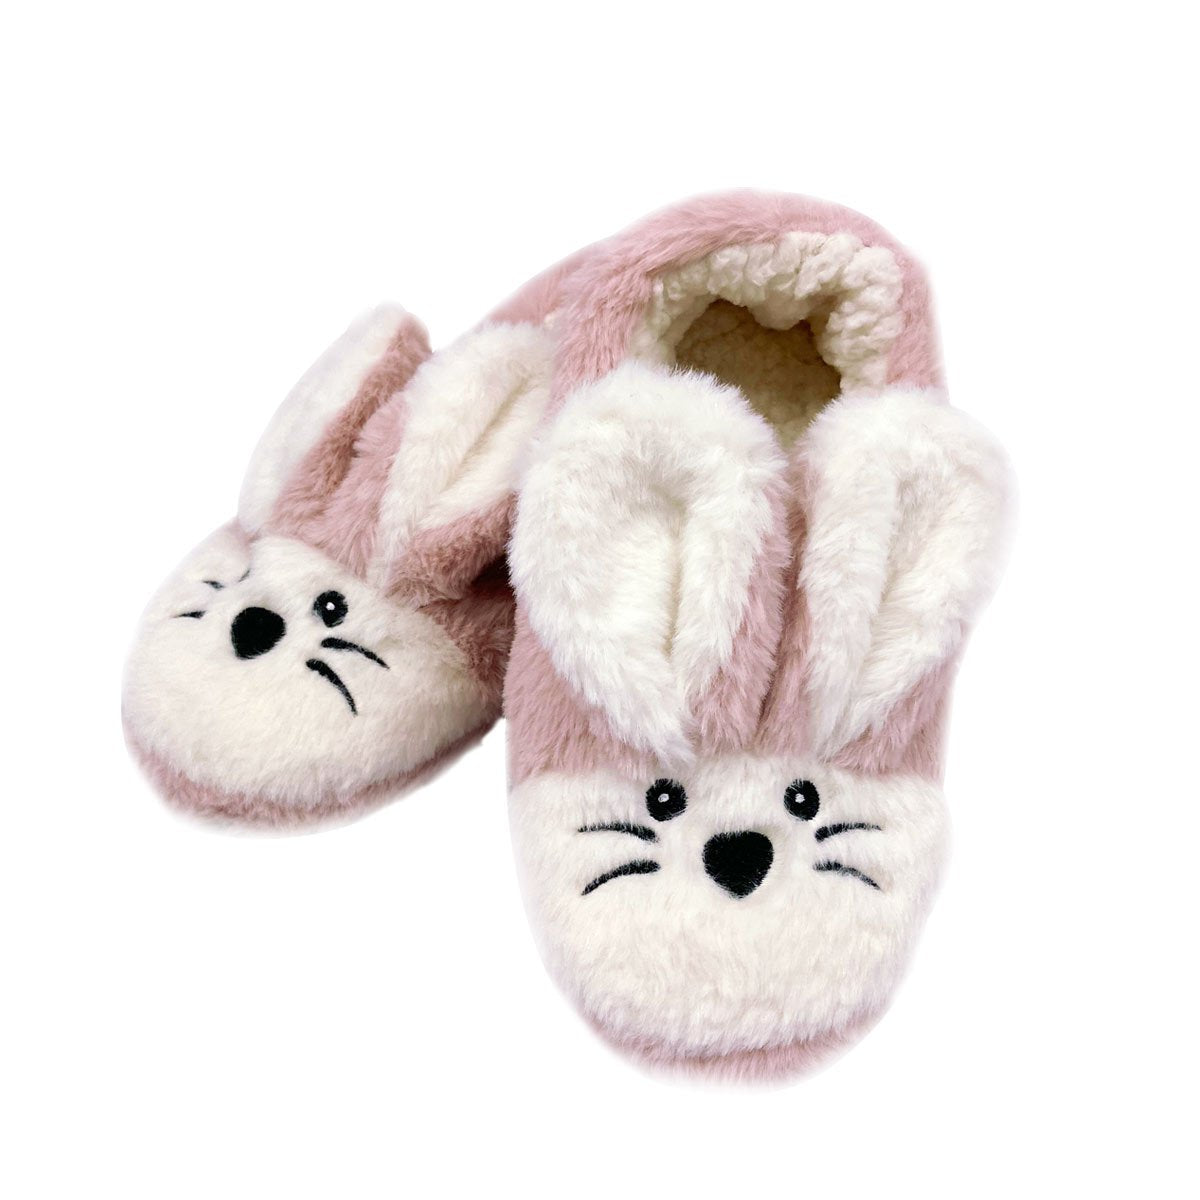 Wholesale Bunny Slippers